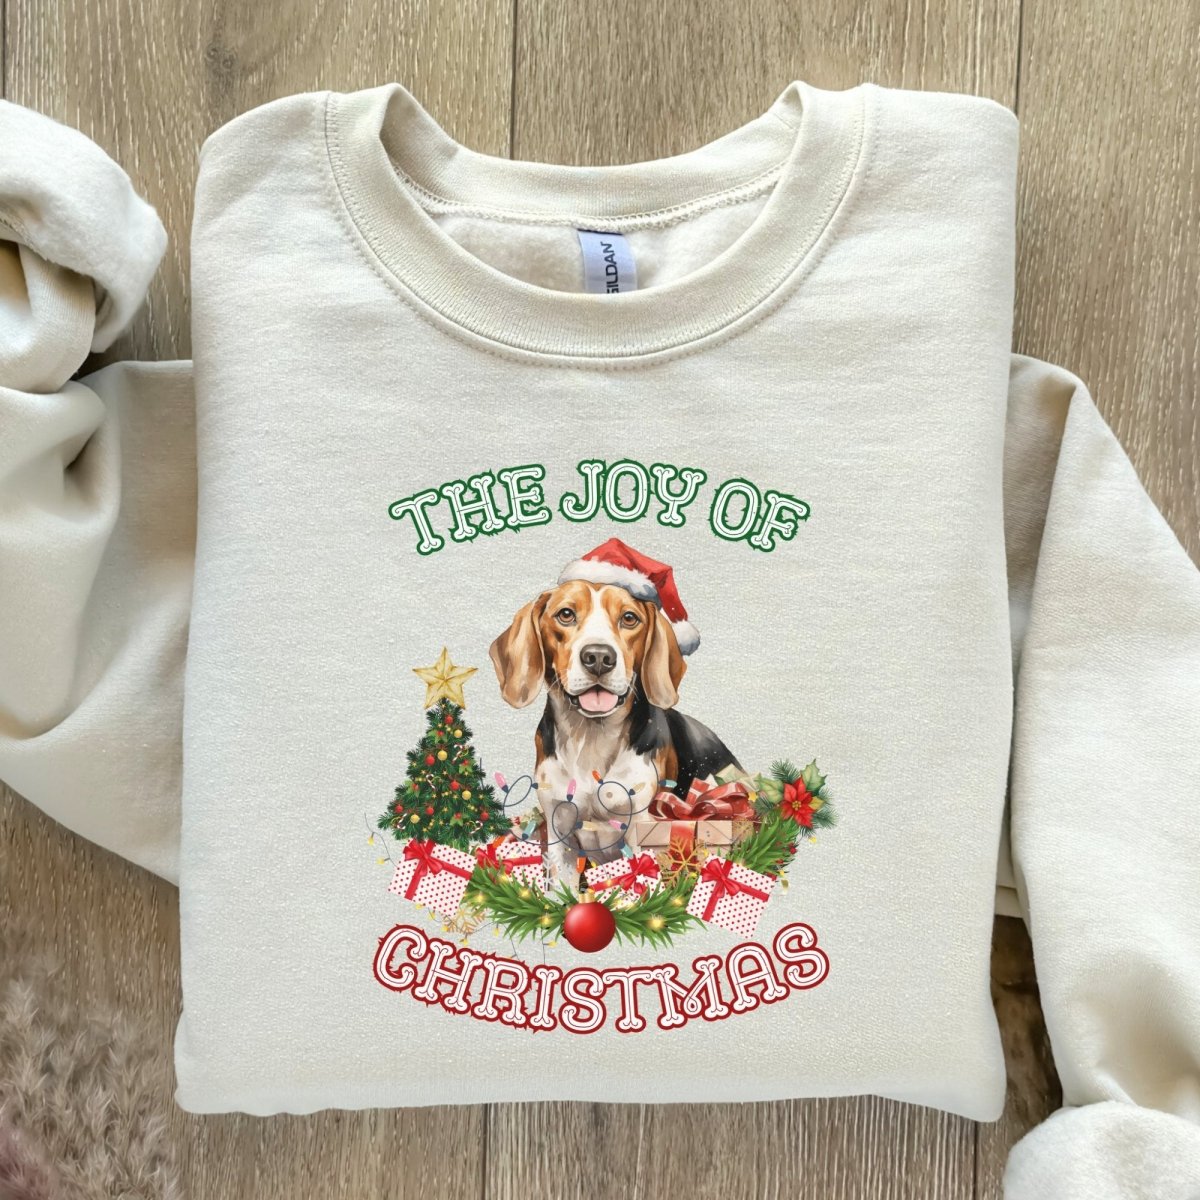 Christmas Beagle Pullover - High Quality Festive Unisex Sweater, Gift for Beagle Owner, Gift for Doglovers, Cute Xmas Dog Sweatshirt - Everything Pixel